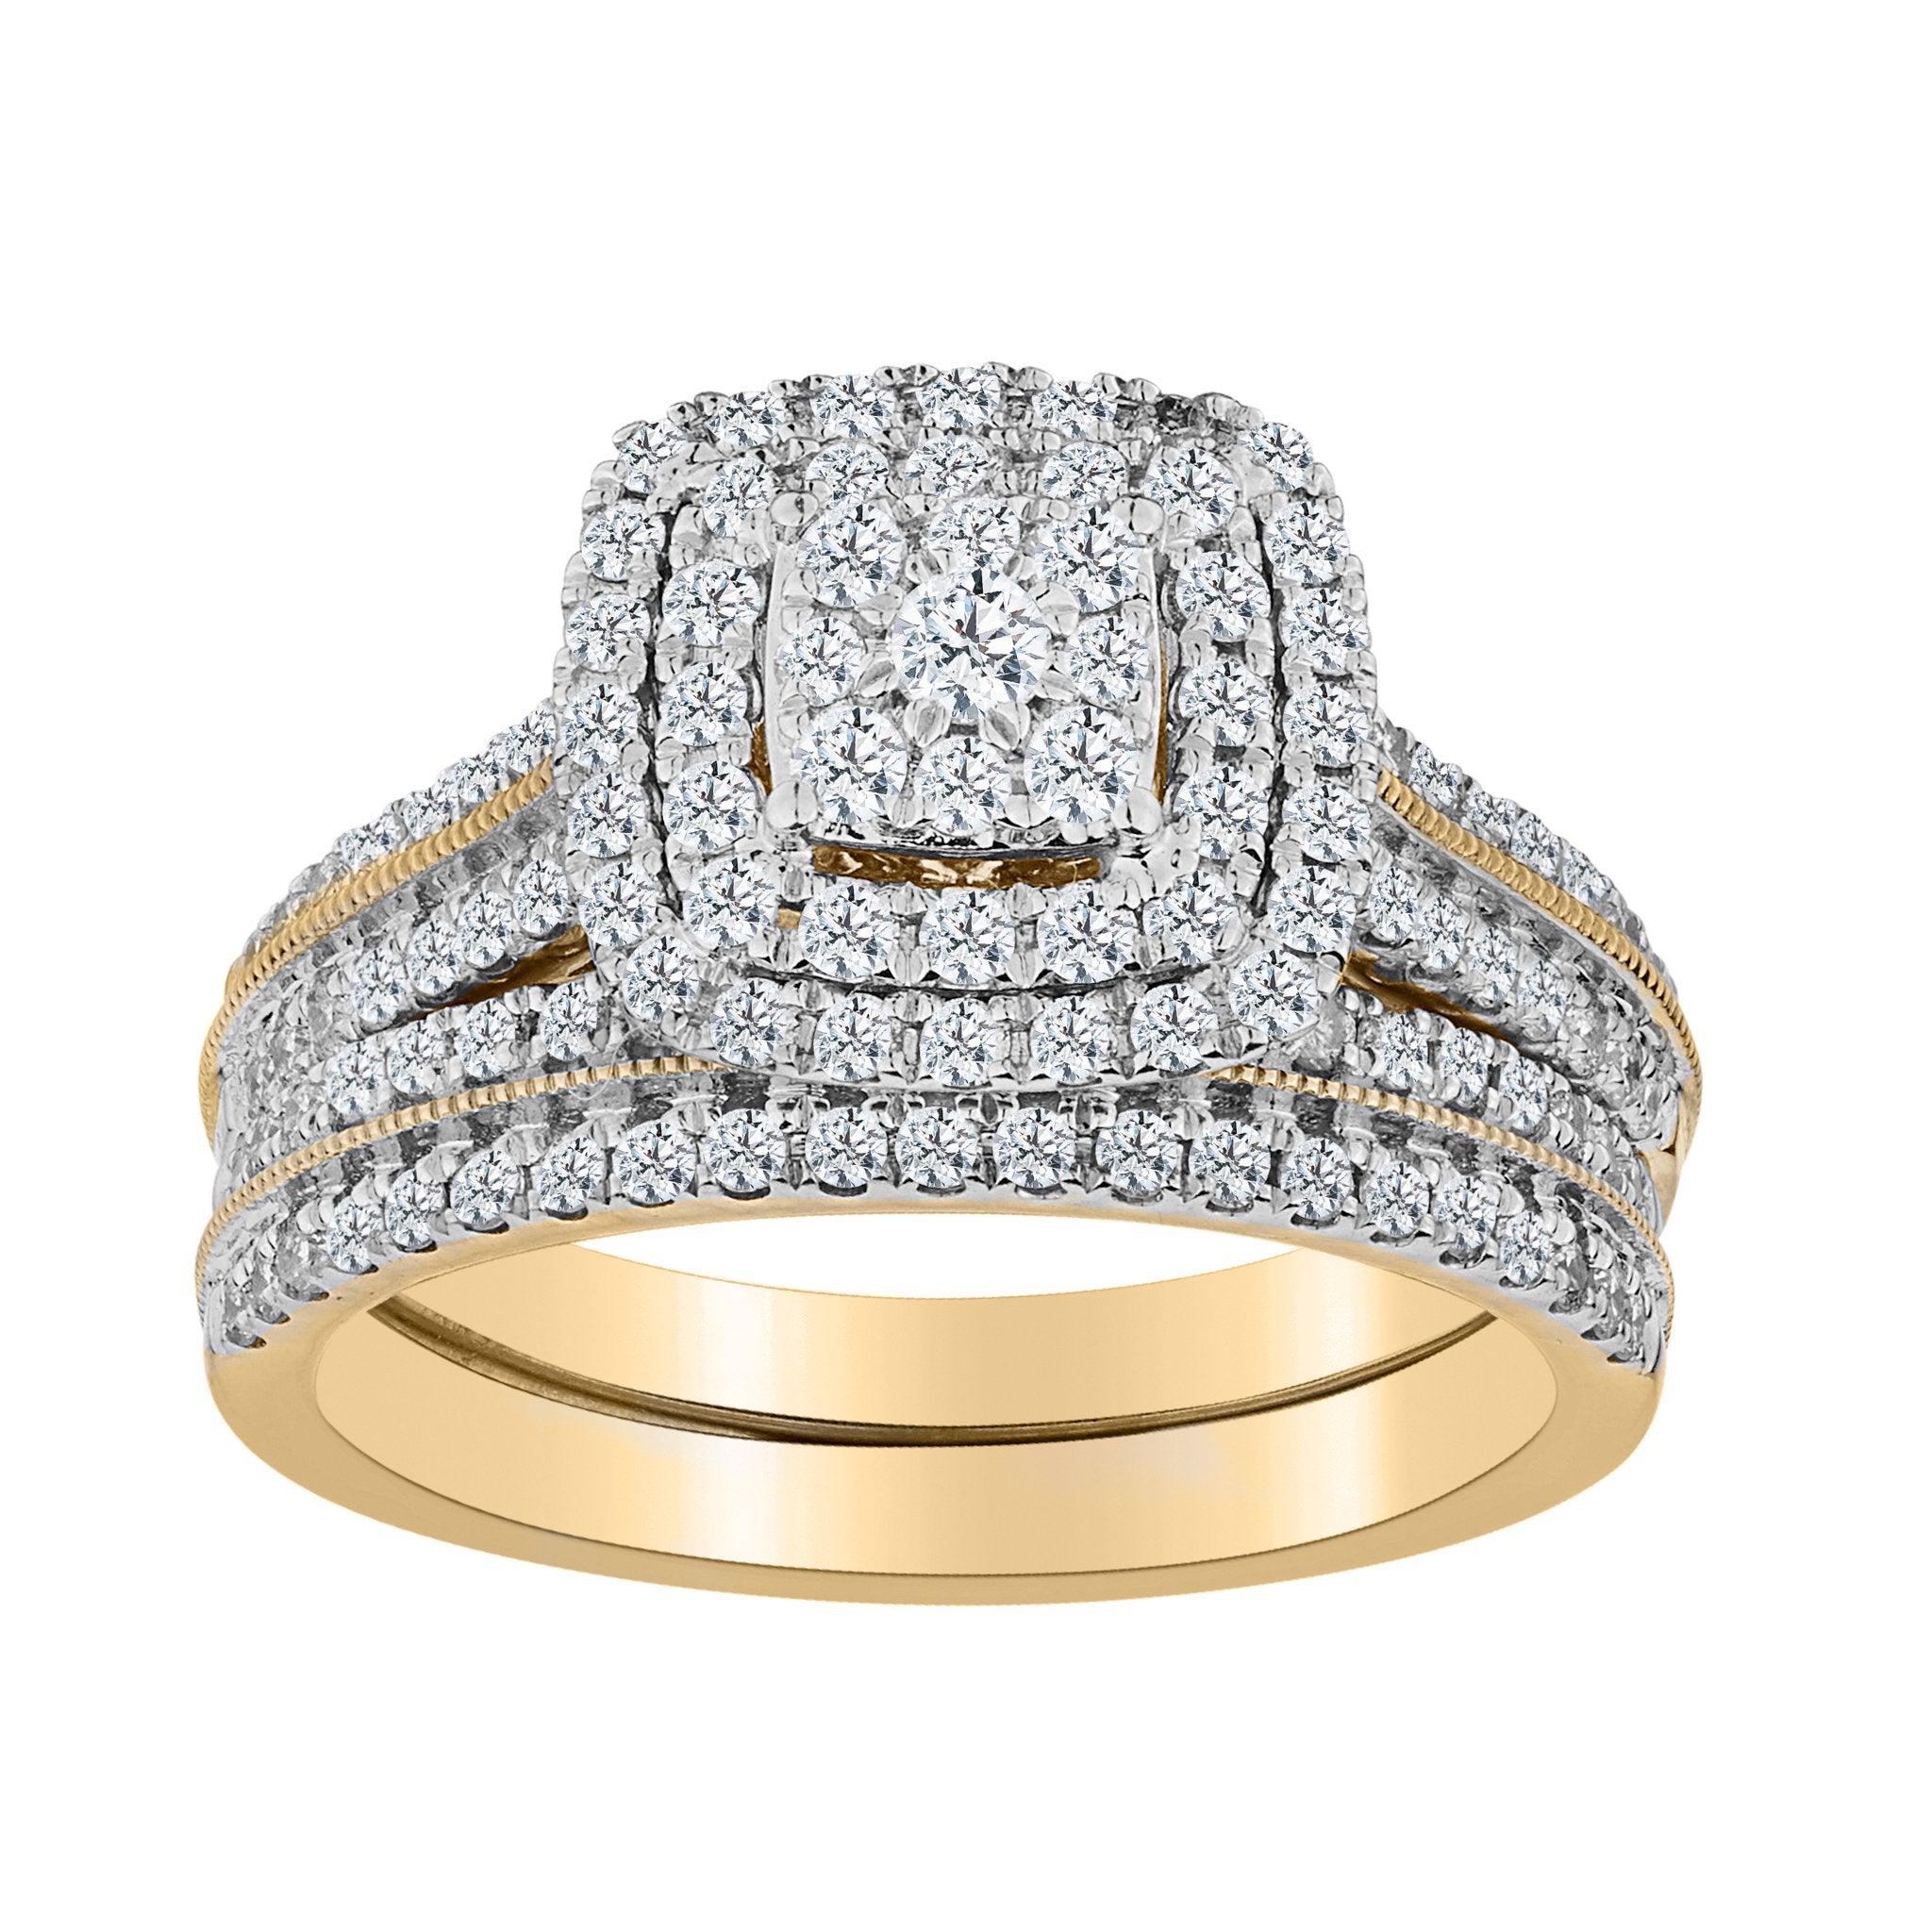 1.00 CARAT DIAMOND PAVE RING SET, 10kt YELLOW GOLD.....................NOW - Griffin Jewellery Designs